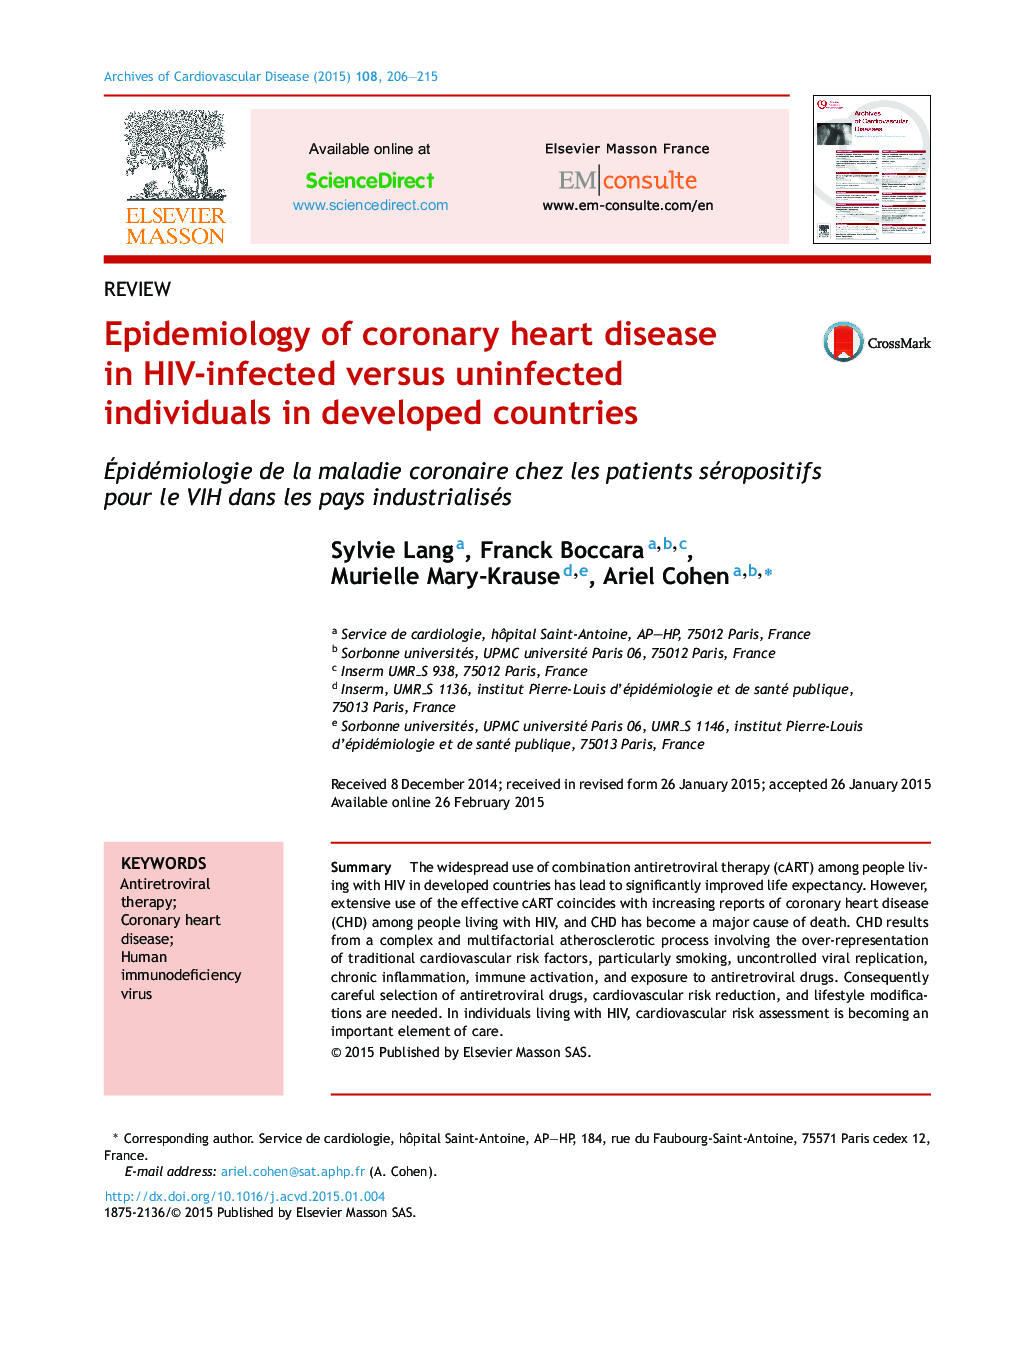 Epidemiology of coronary heart disease in HIV-infected versus uninfected individuals in developed countries